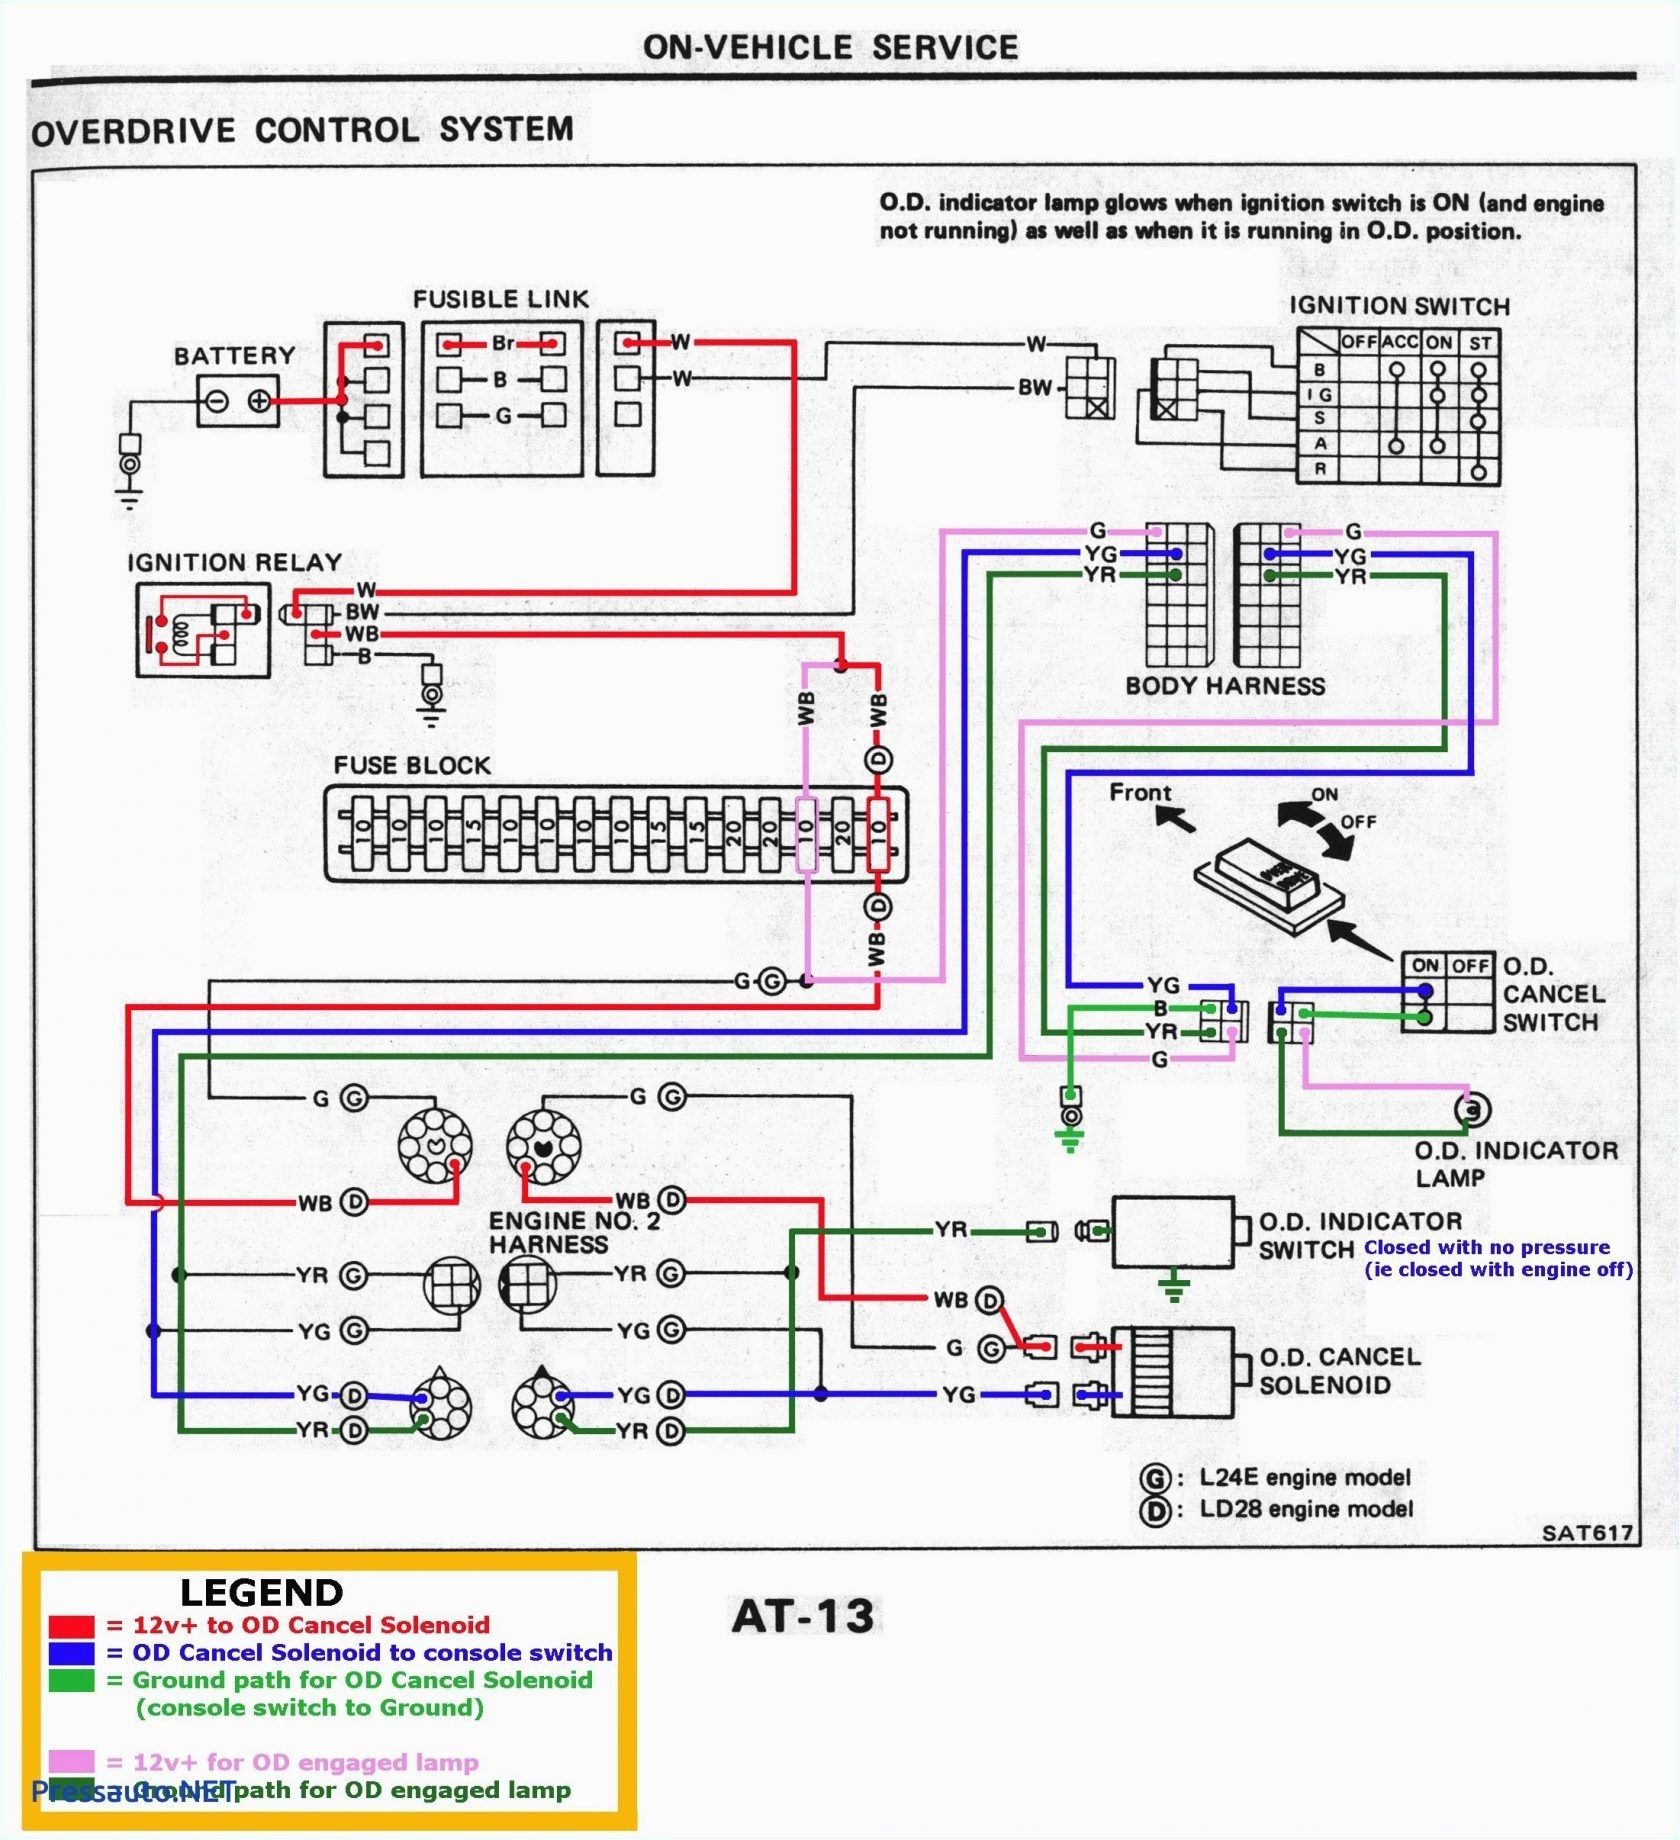 2000 nissan sentra horn location free download wiring diagram 2000 nissan sentra horn location free download wiring diagram